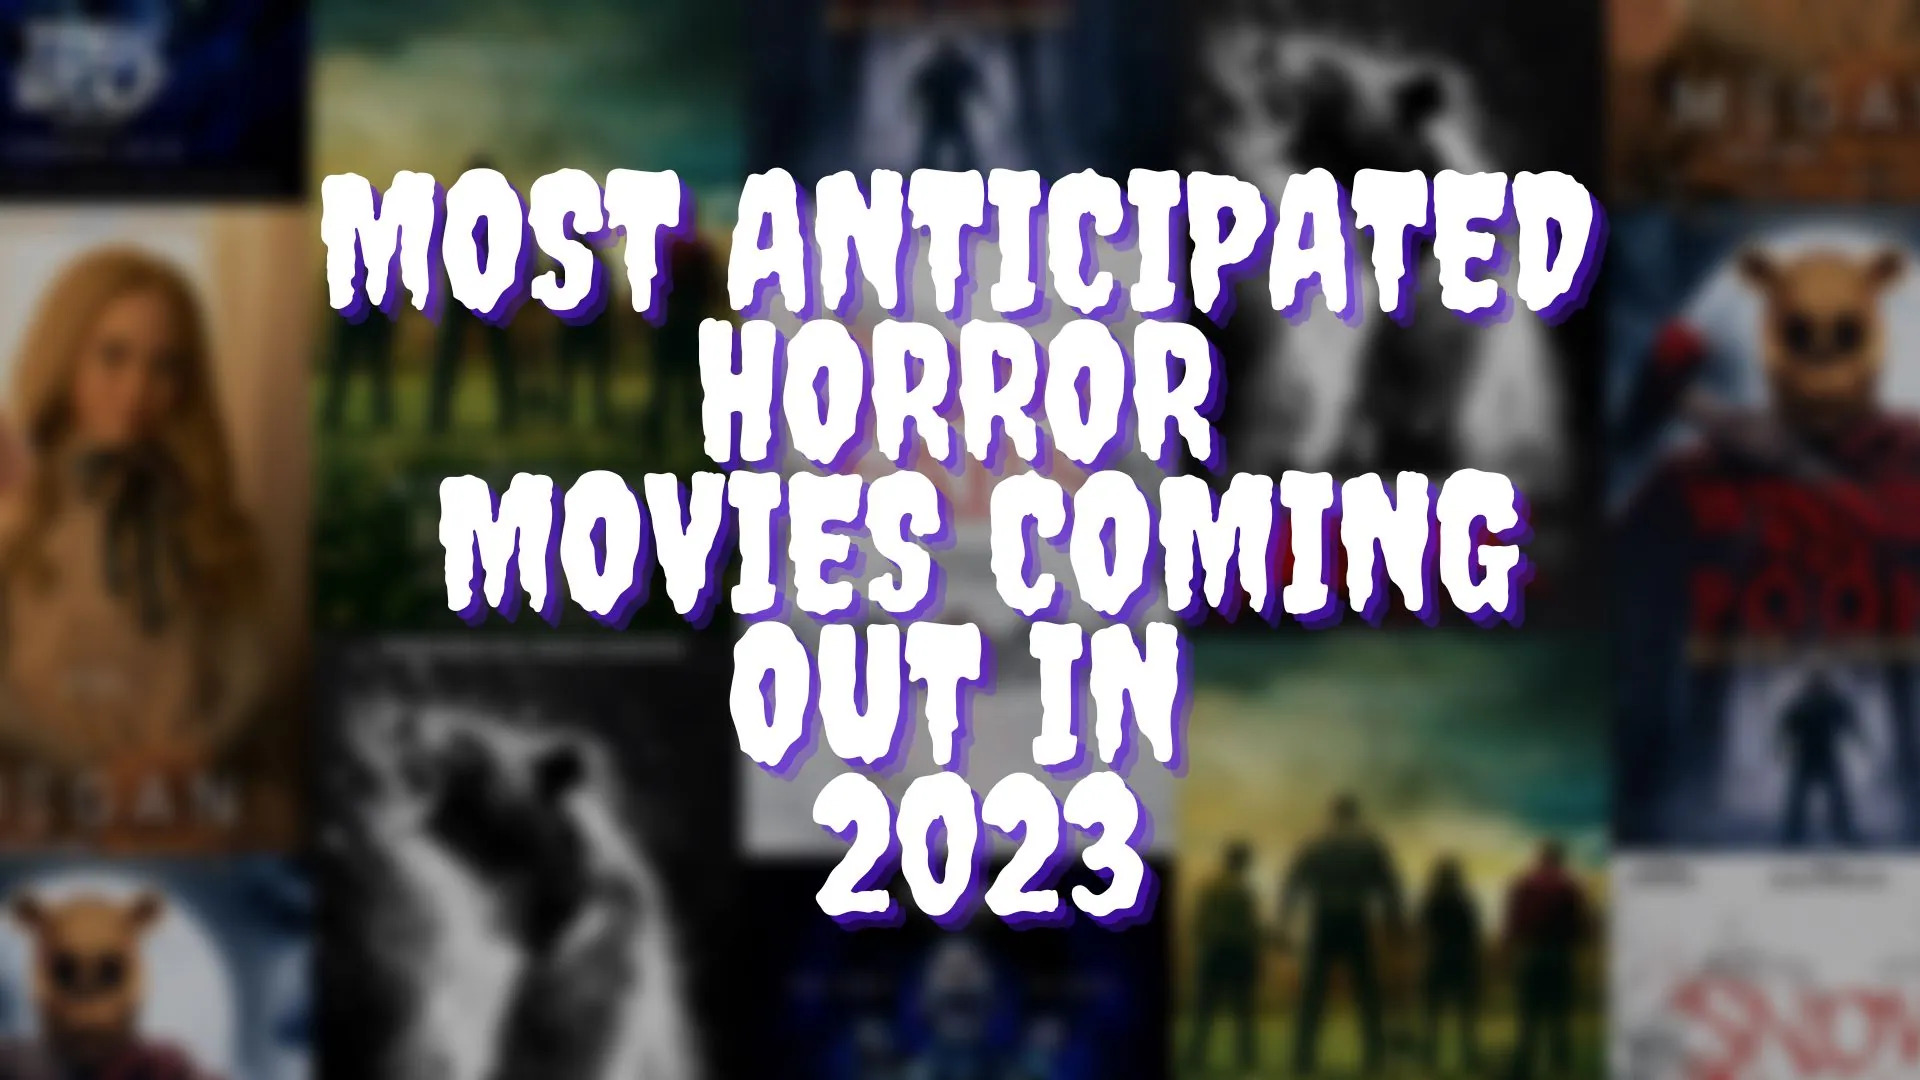 Most Anticipated Horror Movies Coming Out In 2023